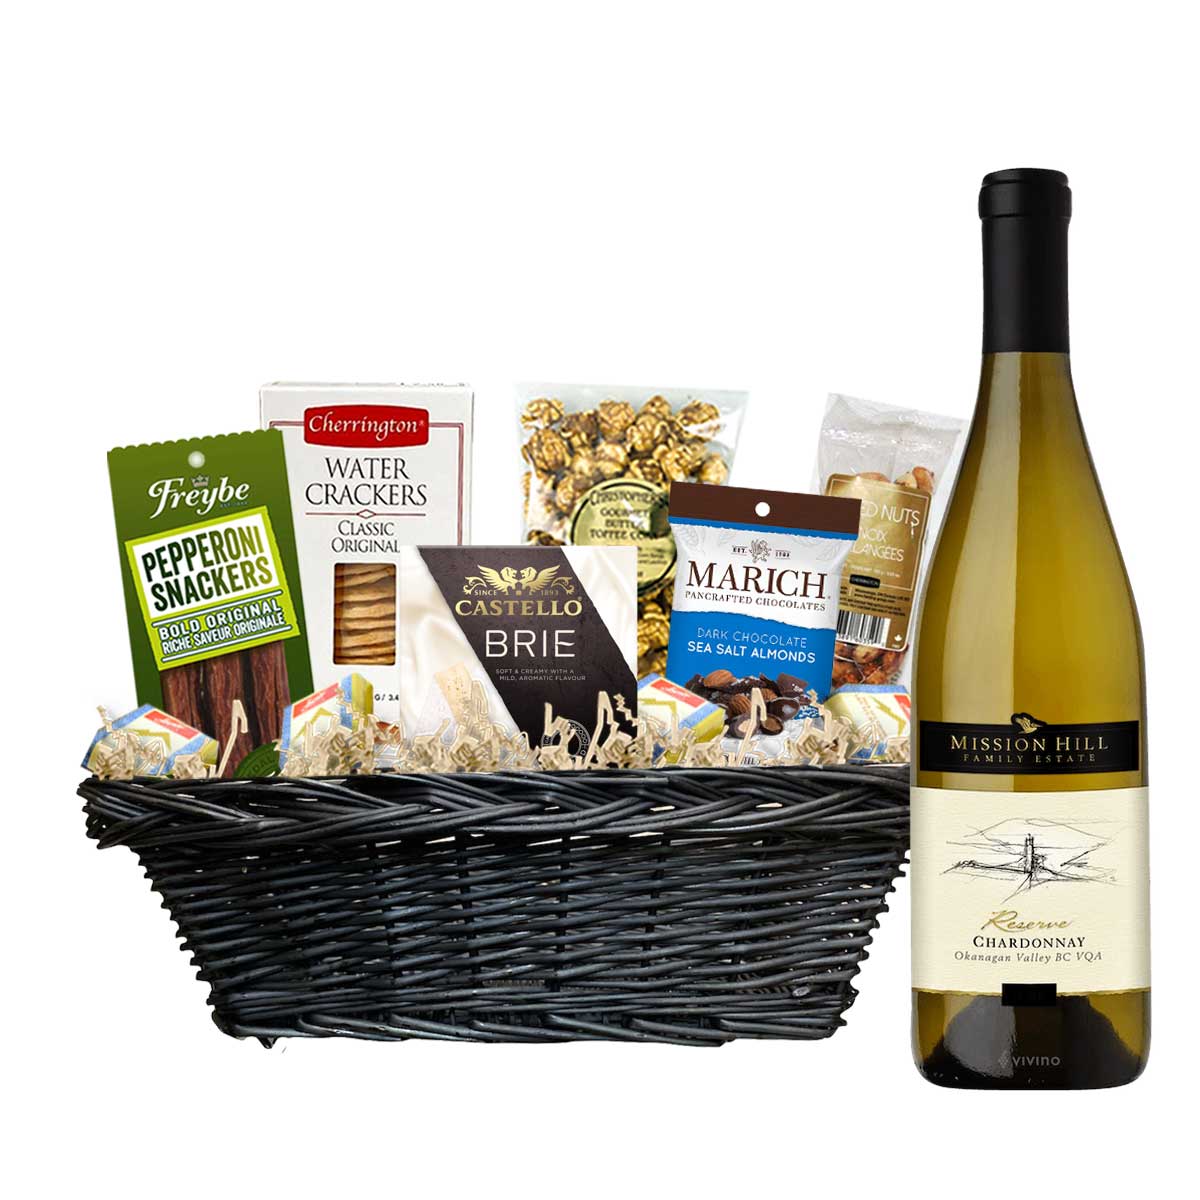 TAG Liquor Stores Canada Delivery-Mission Hill Reserve Chardonnay 750ml Corporate Gift Basket-wine-tagliquorstores.com